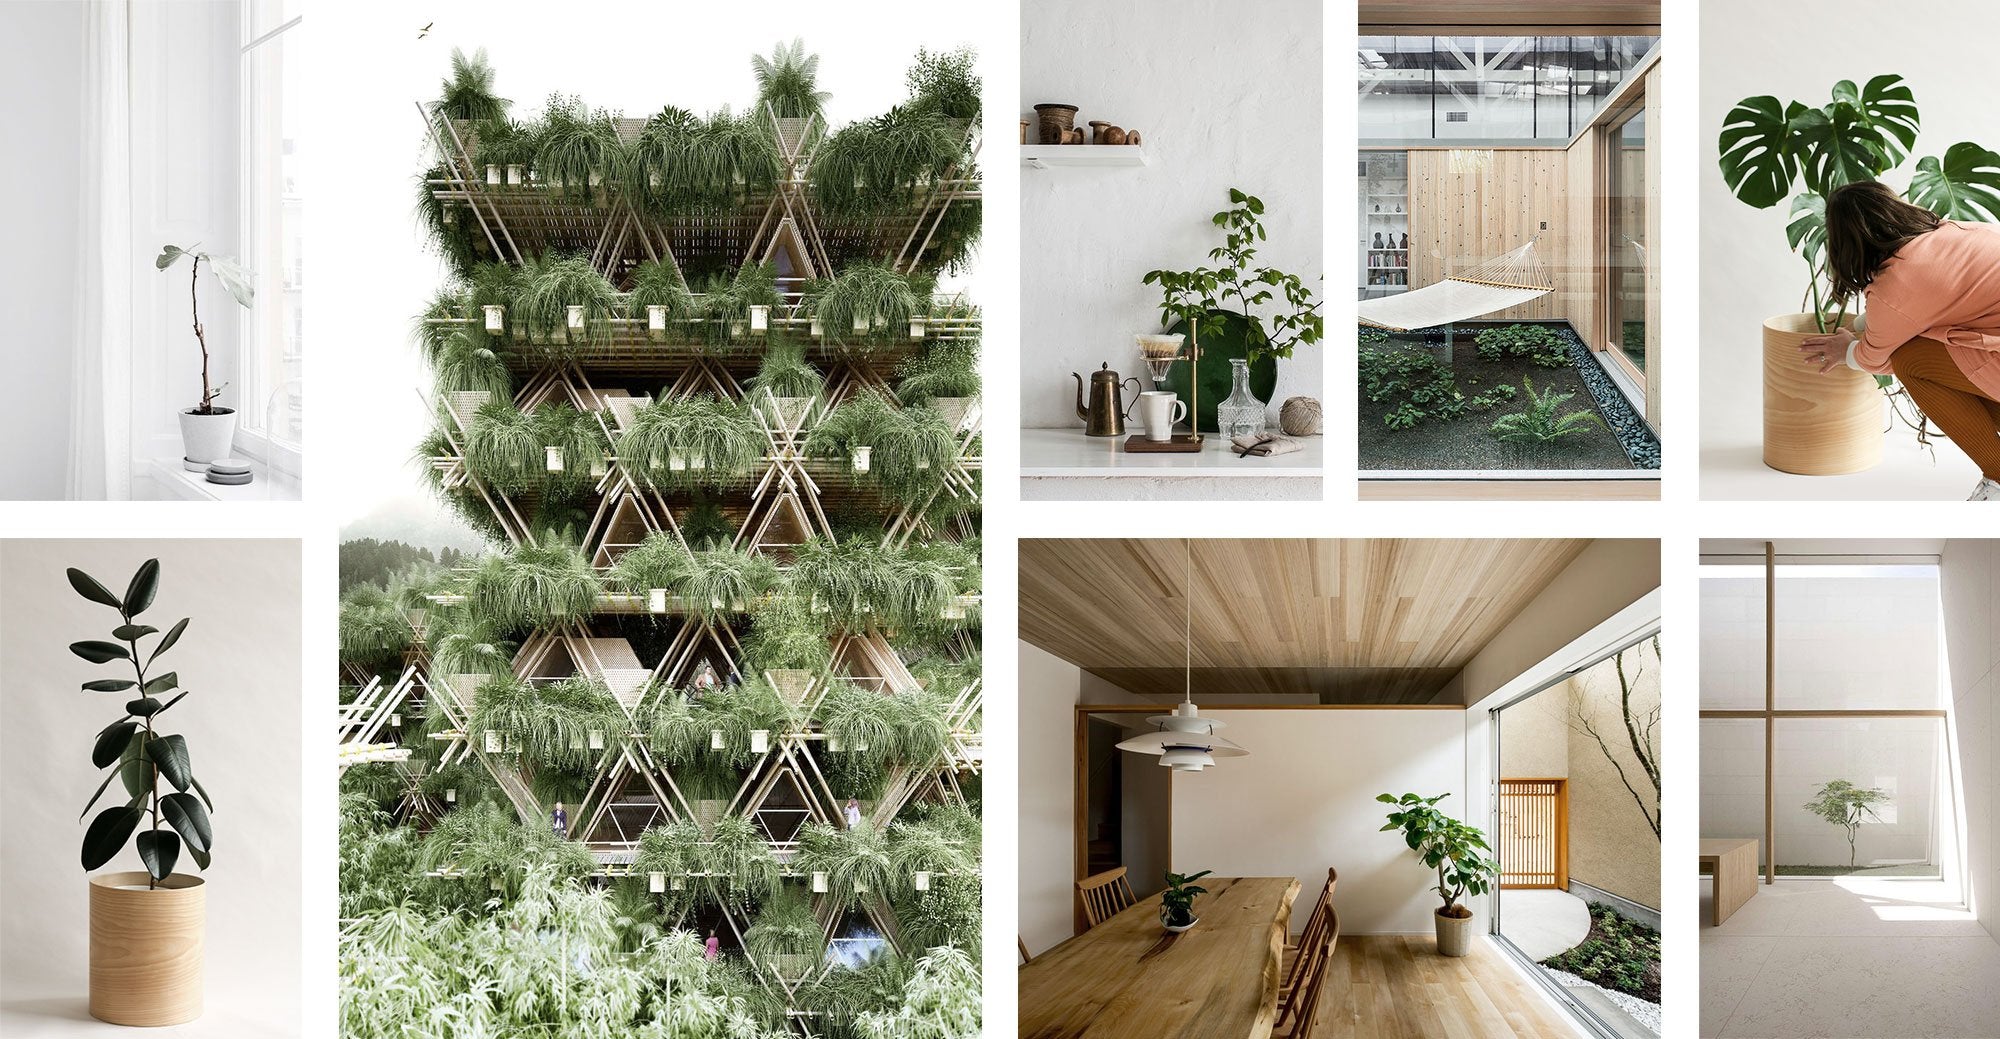 Inspiration for indoor plants and architecture 